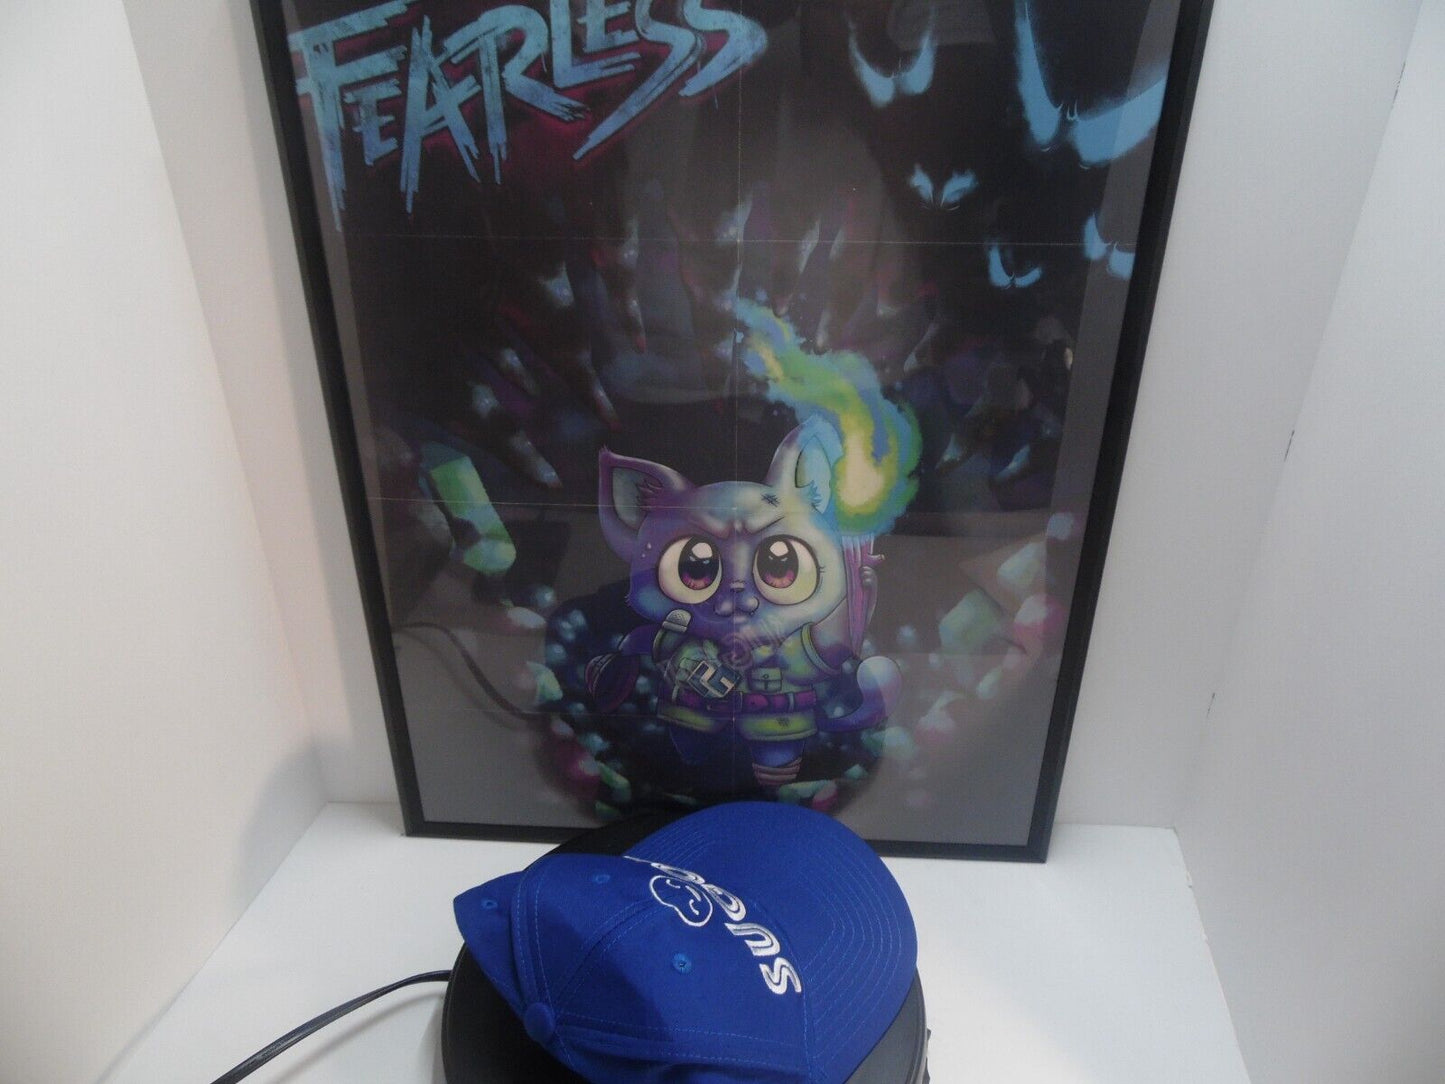 Sugoi Snapback Cap W/ Fearless Anime Poster Anime Loot Crate Box 2019